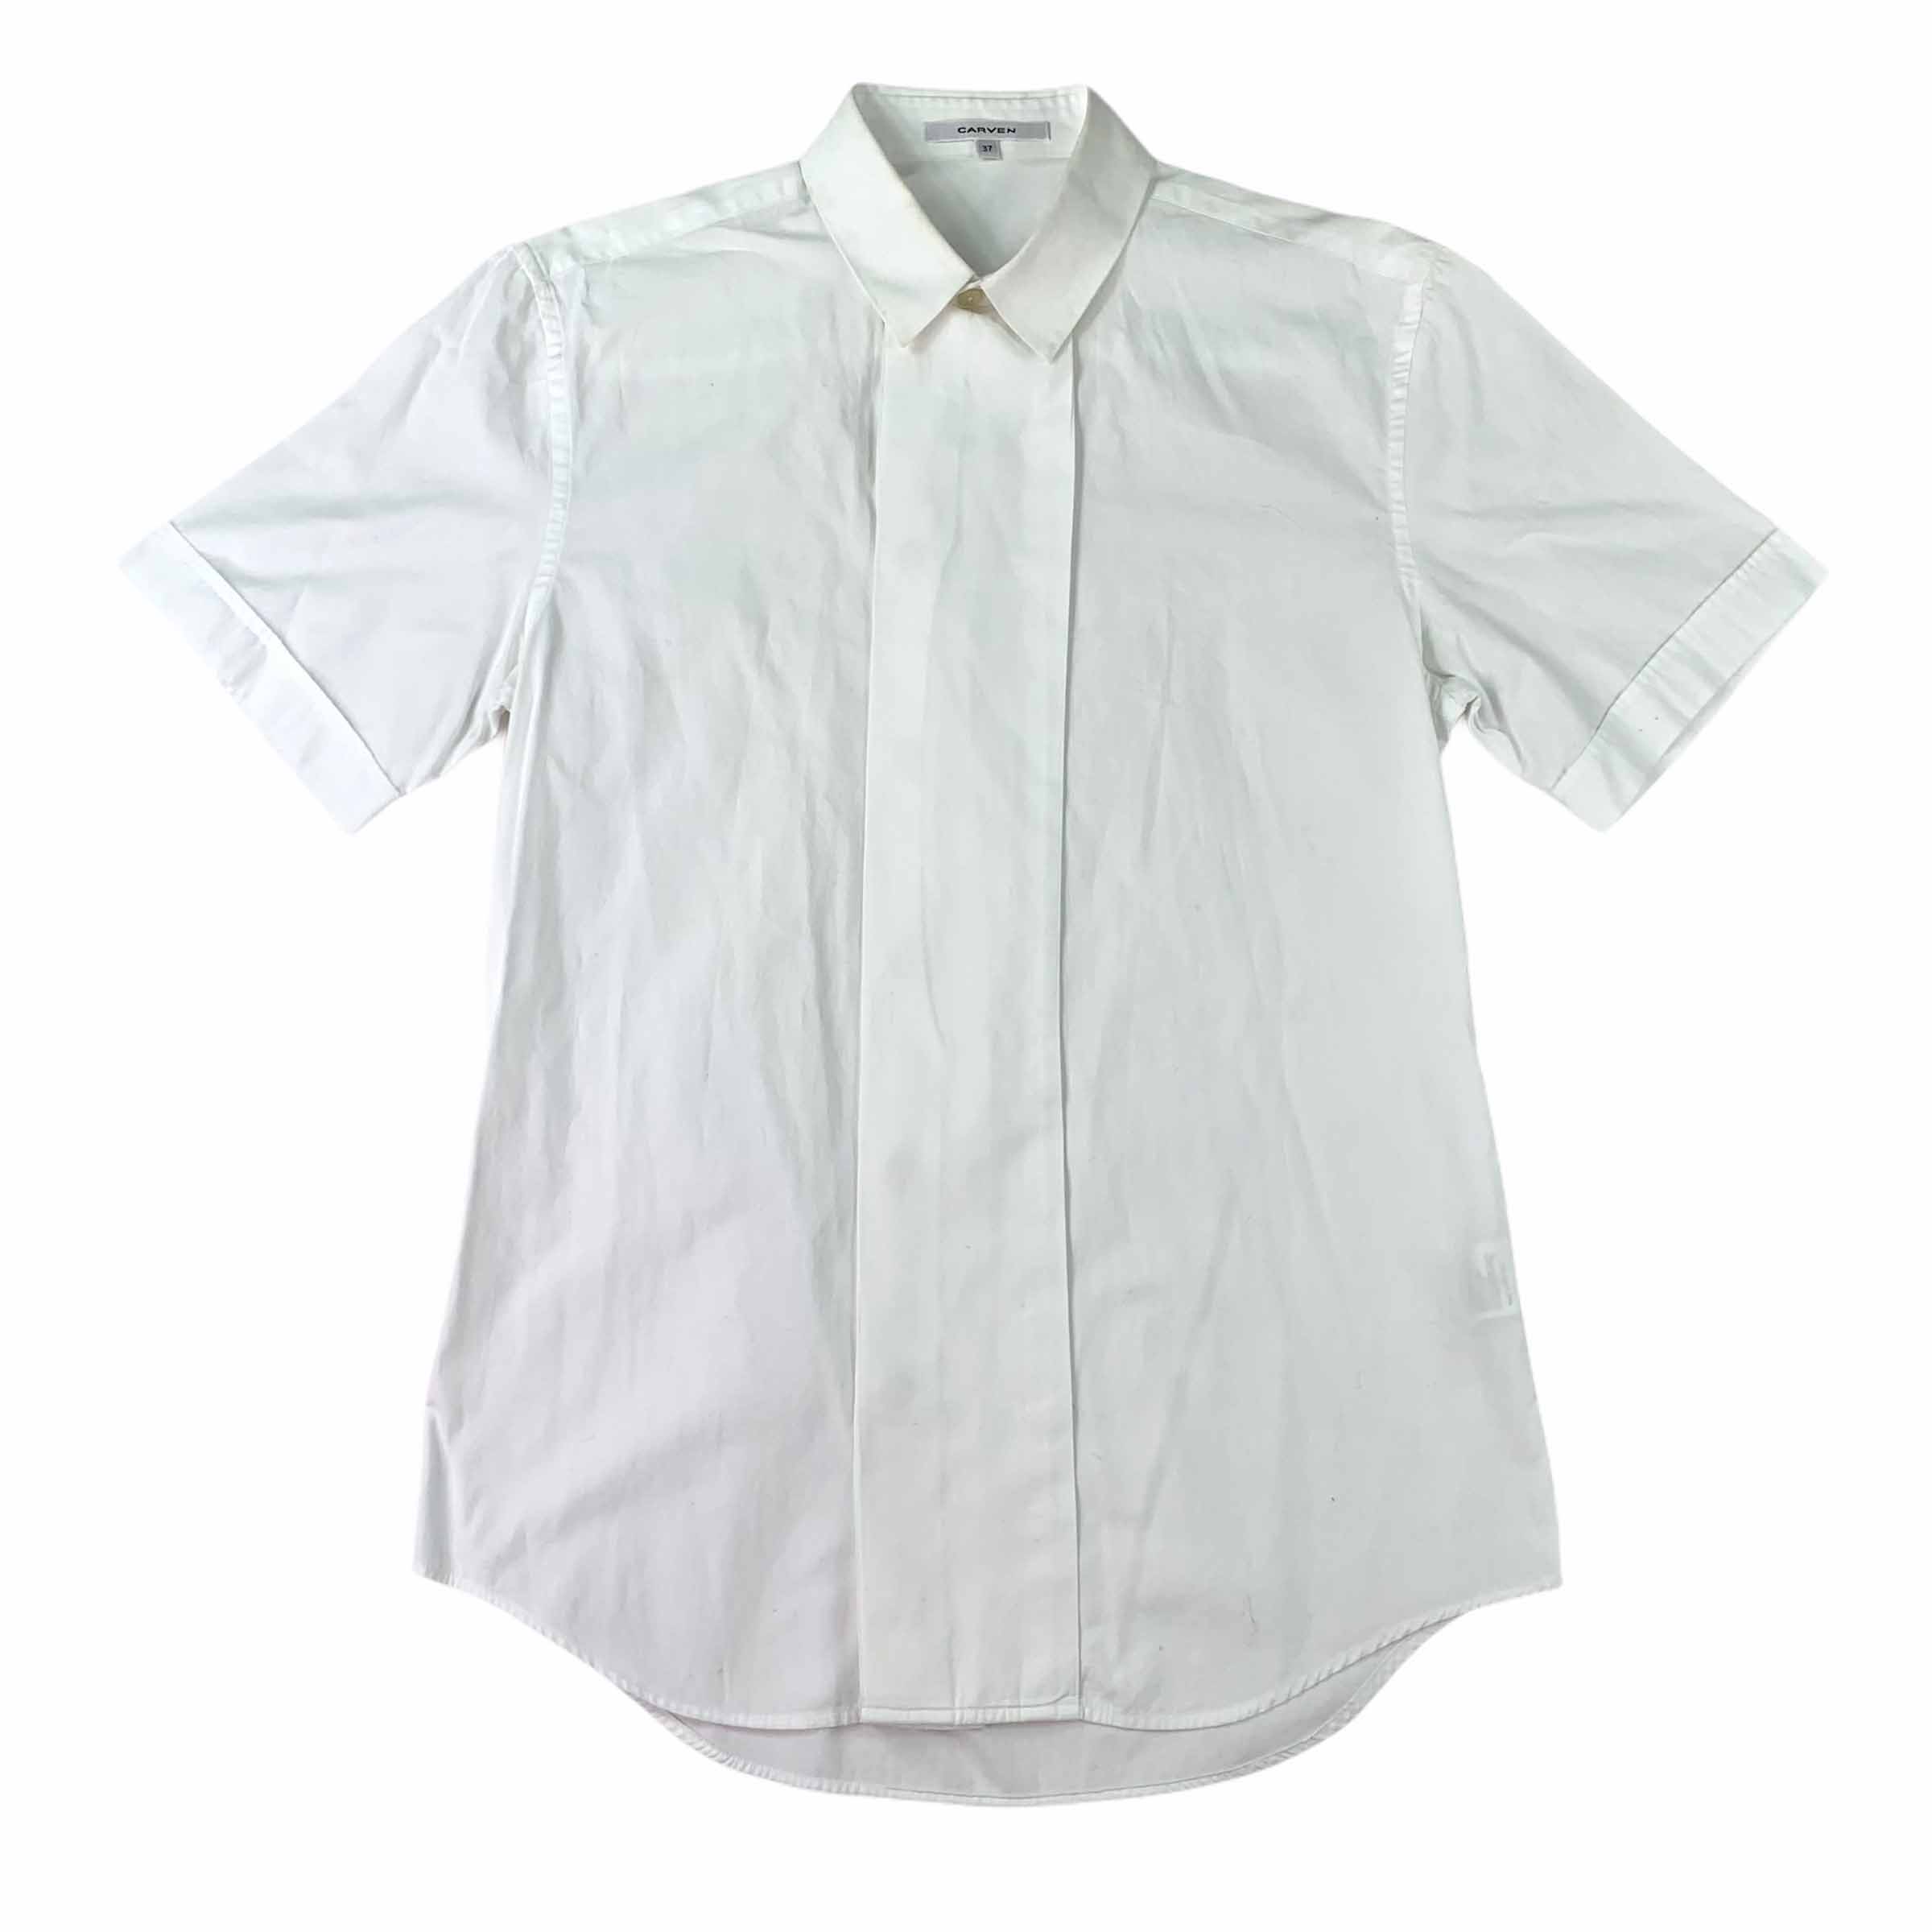 [Carven] Short Sleeve Shirt WH - Size 37